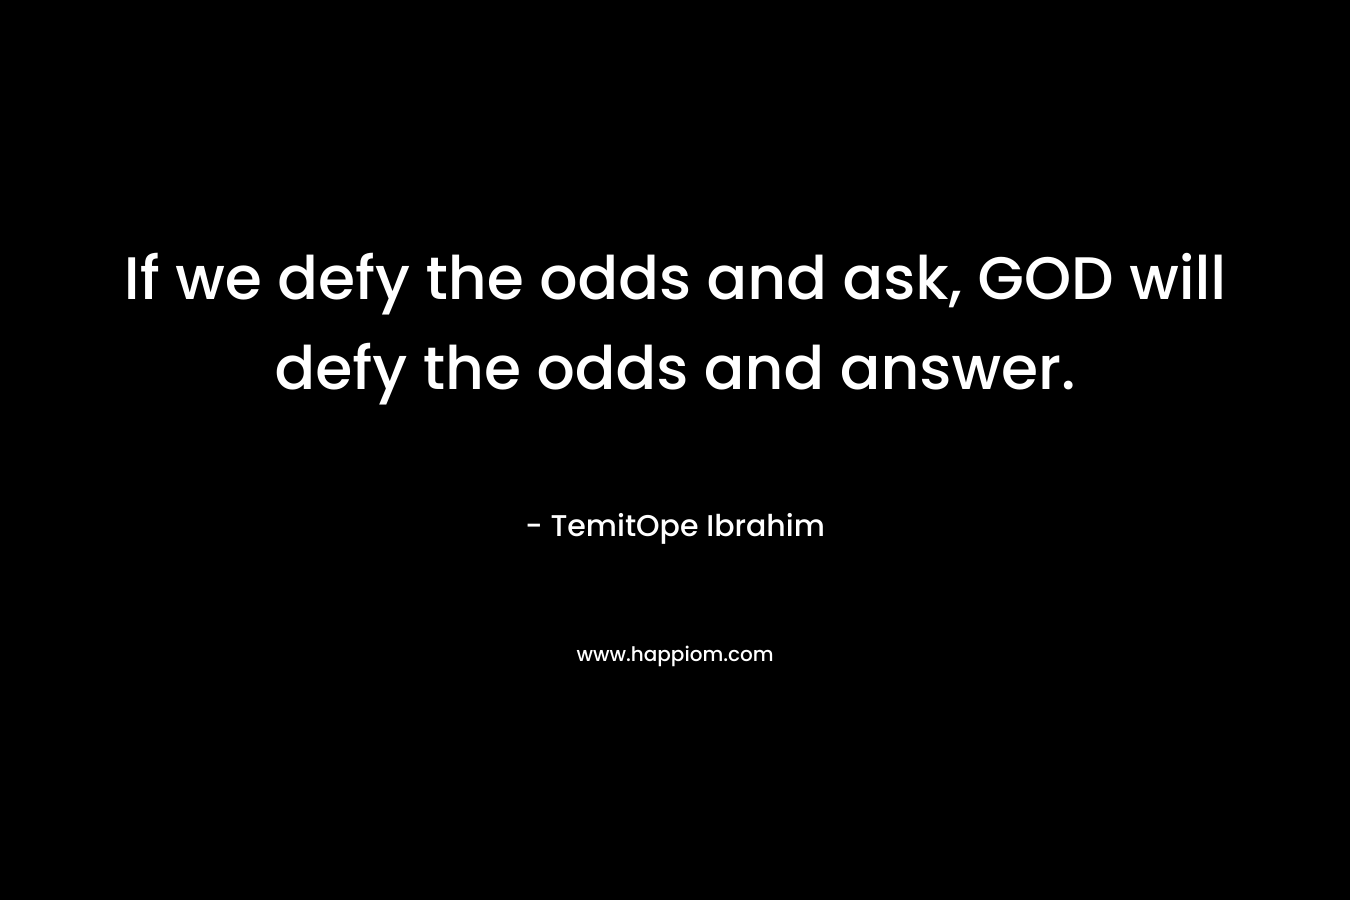 If we defy the odds and ask, GOD will defy the odds and answer.